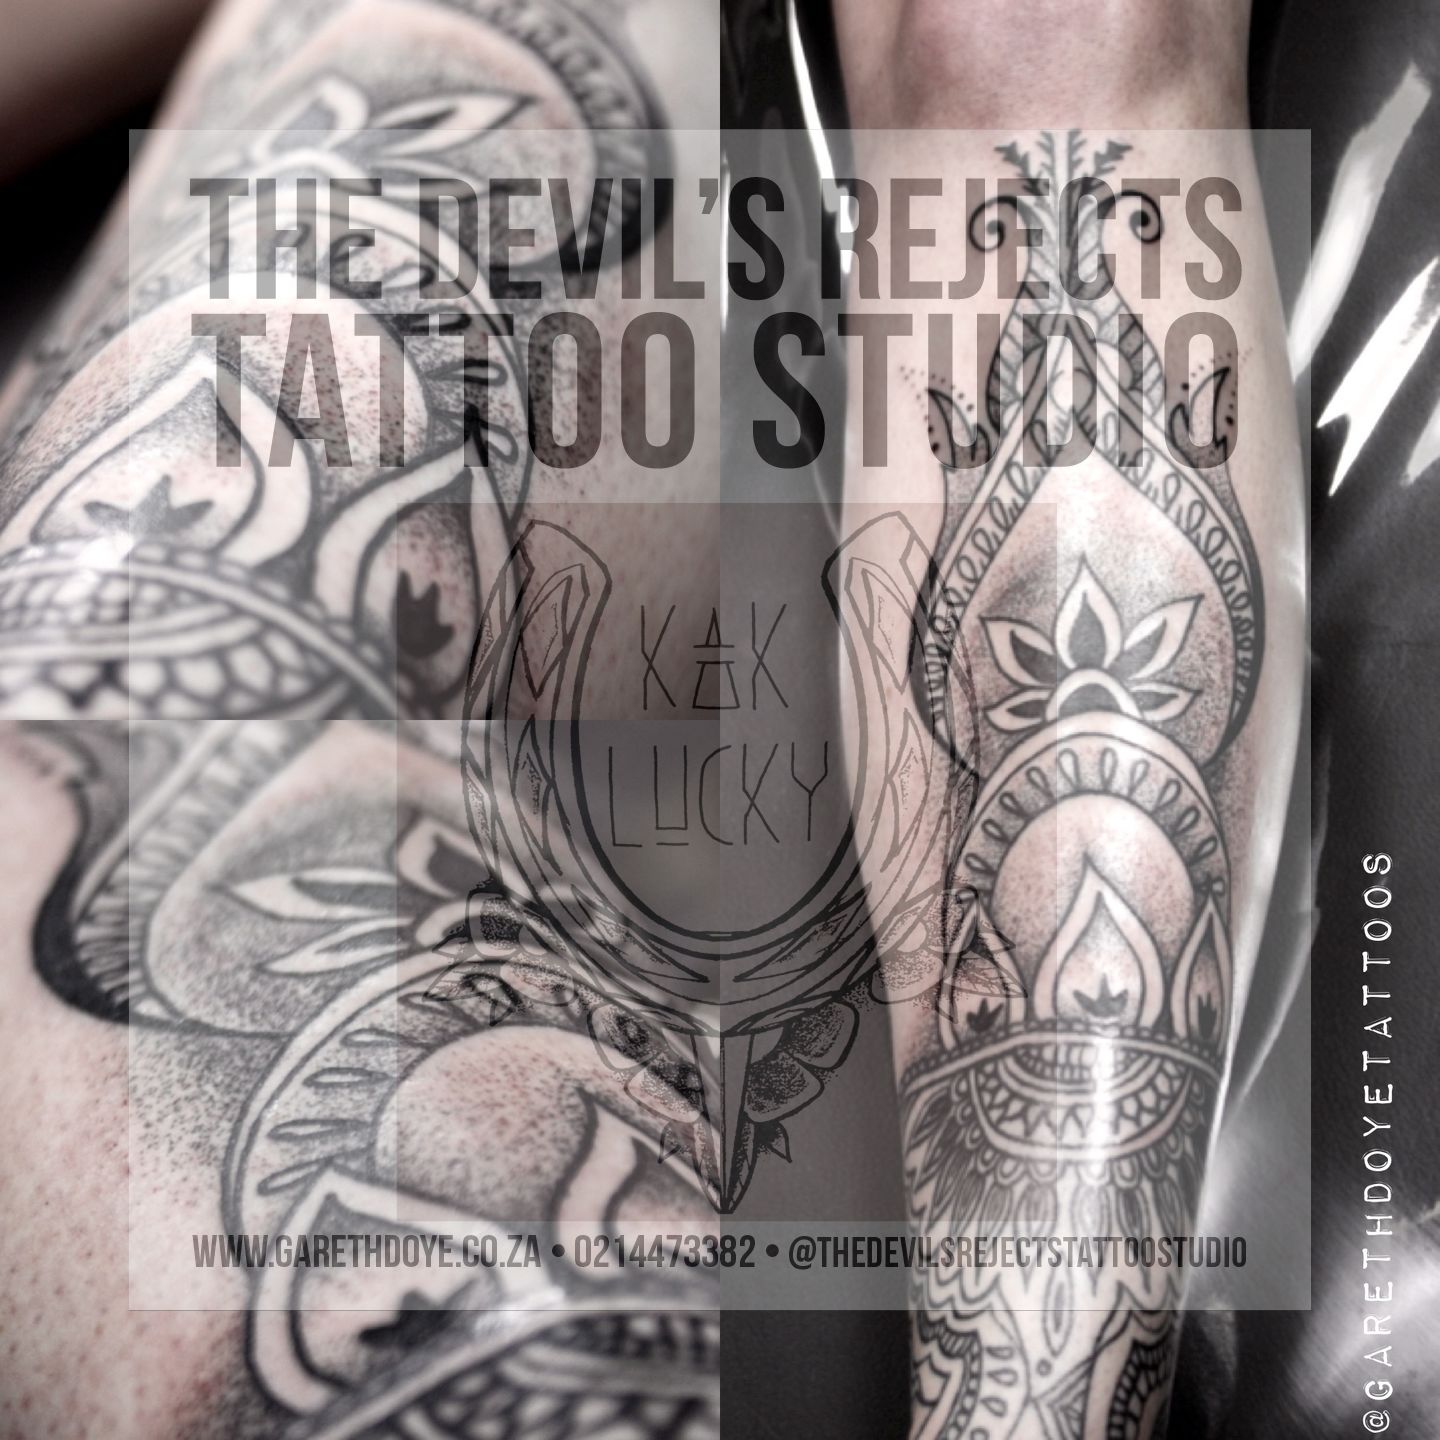 Book tickets for Tattooathon 2015 The Devils Rejects Tattoo Studio